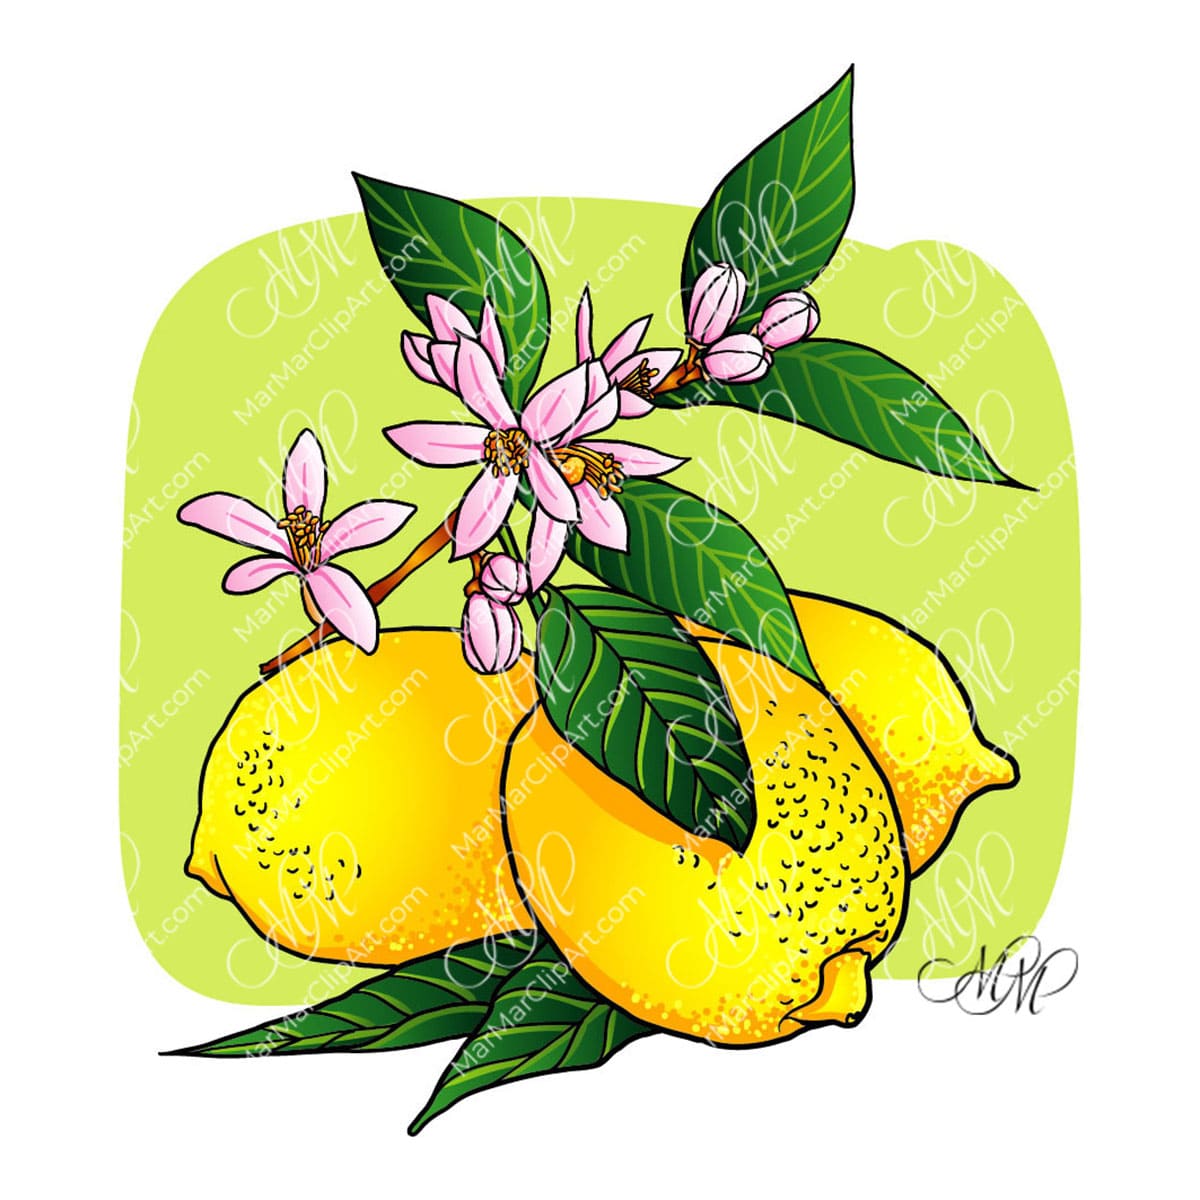 Lemon with leaves and flowers vector illustration